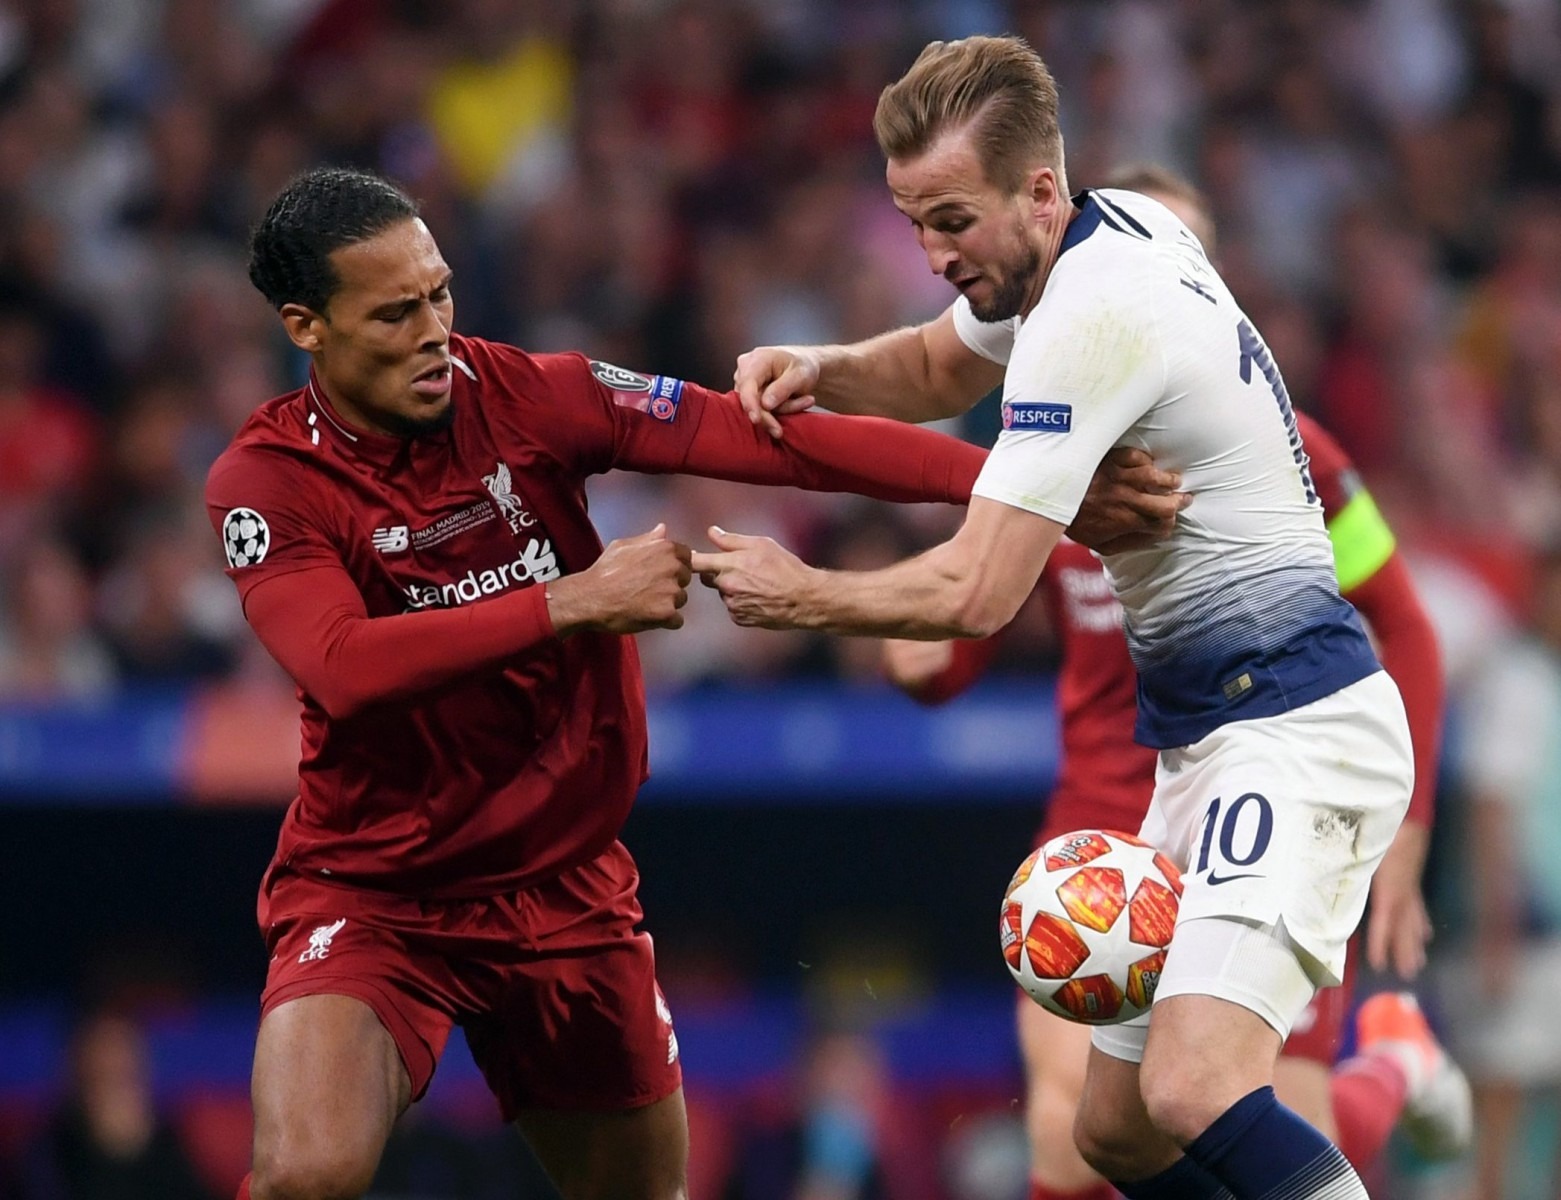 , Kane insists he can get better of Van Dijk and help Spurs upset Liverpool at fortress Anfield